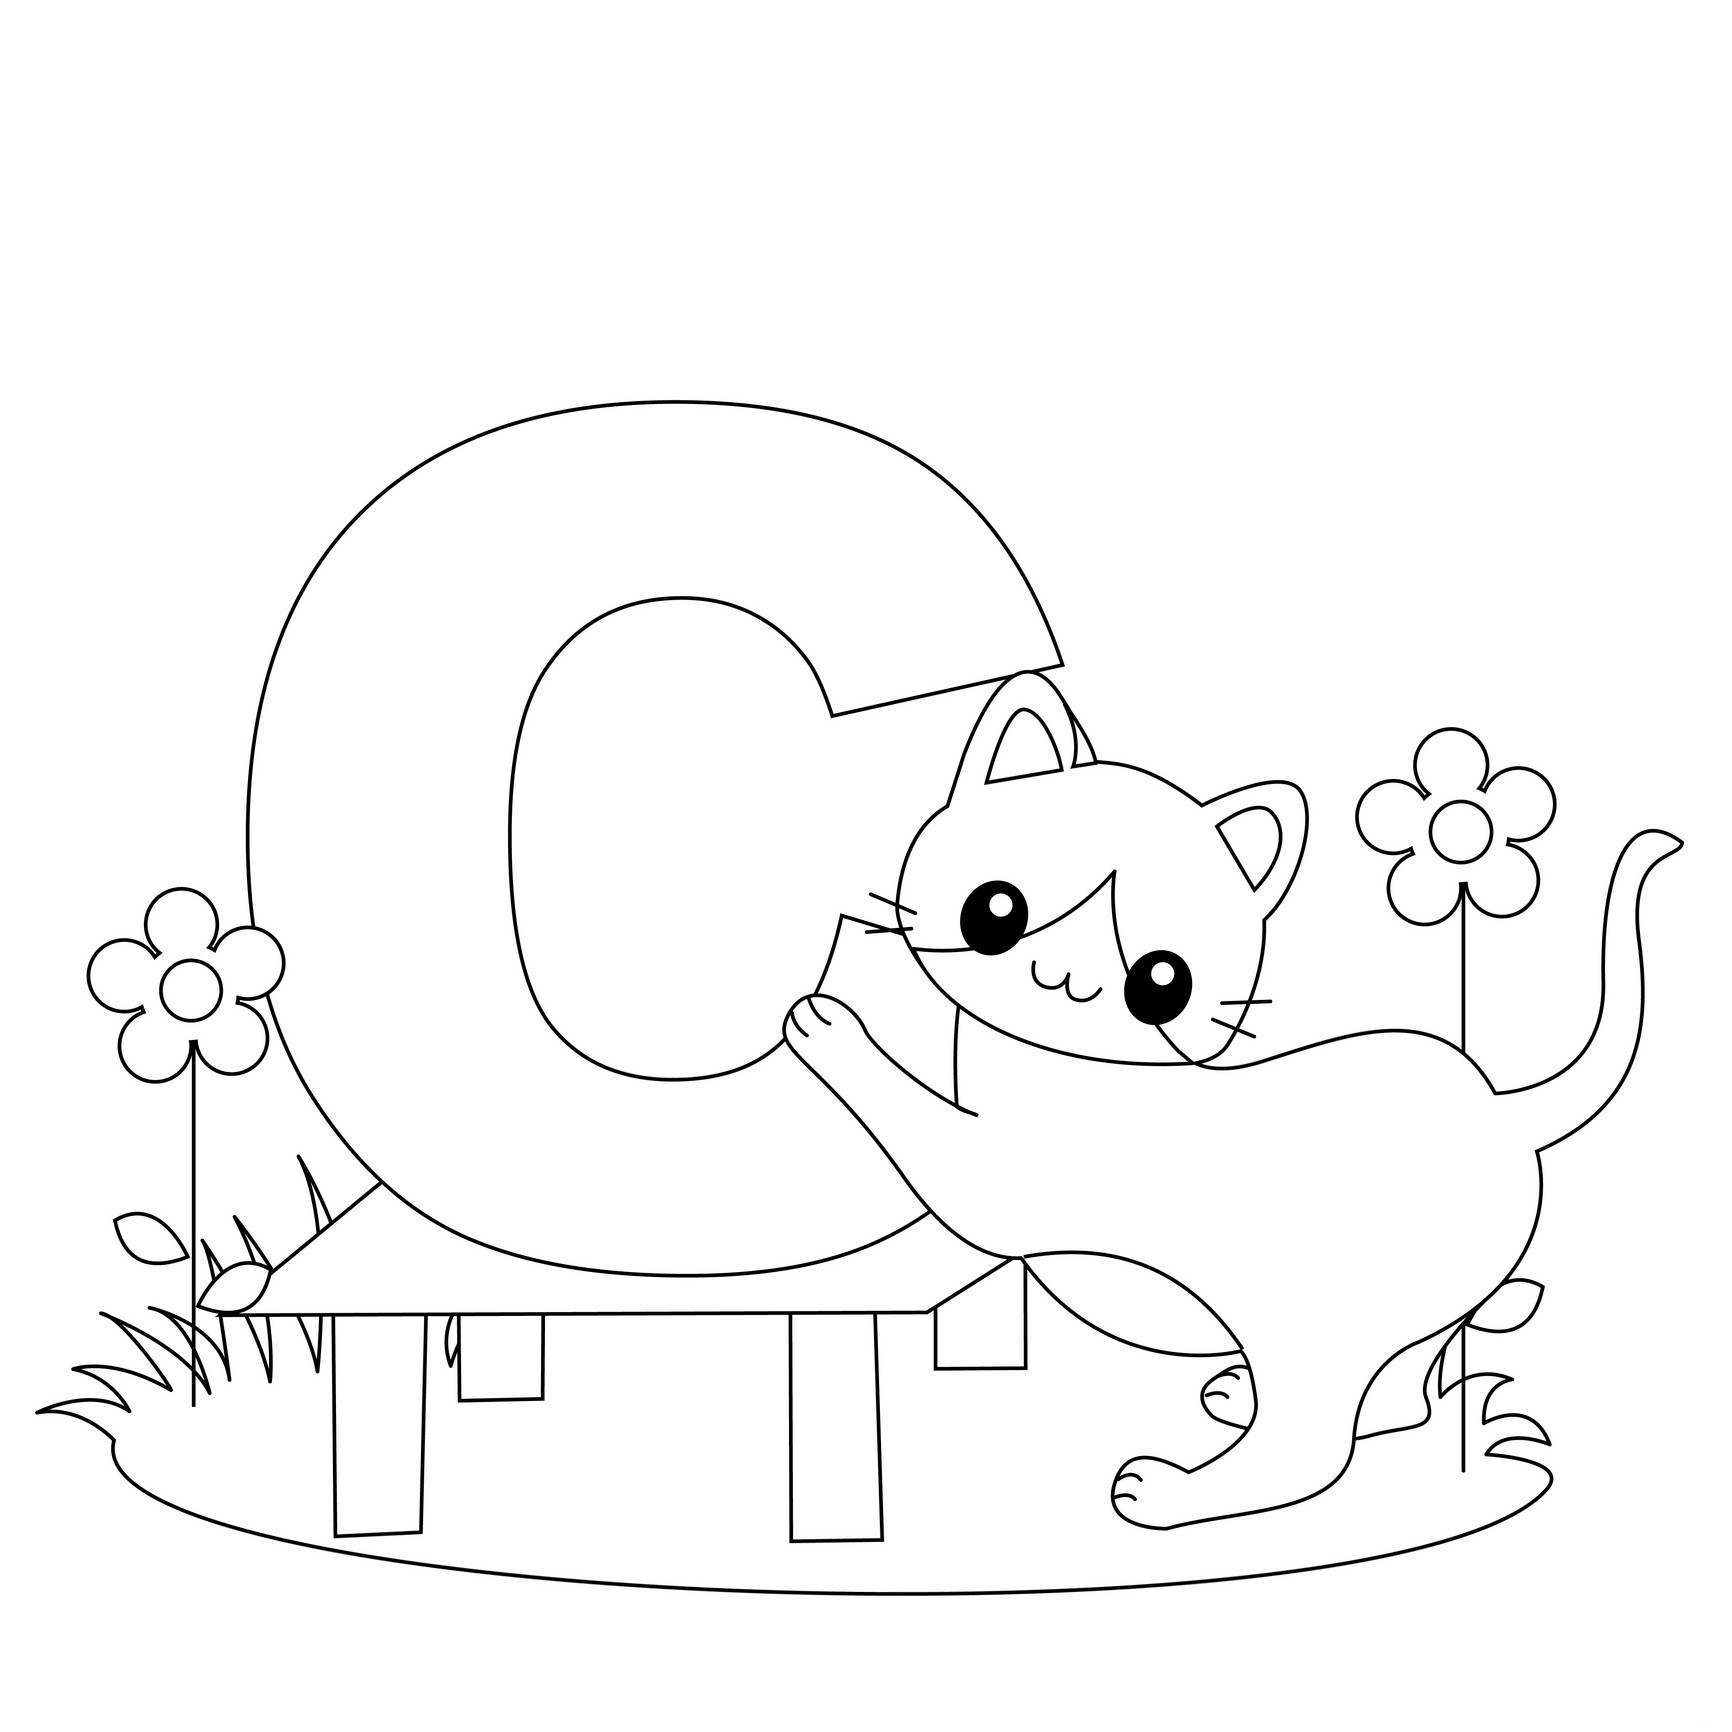 gambar-alphabet-part-ii-coloring-printable-page-kids-alphabets-pages